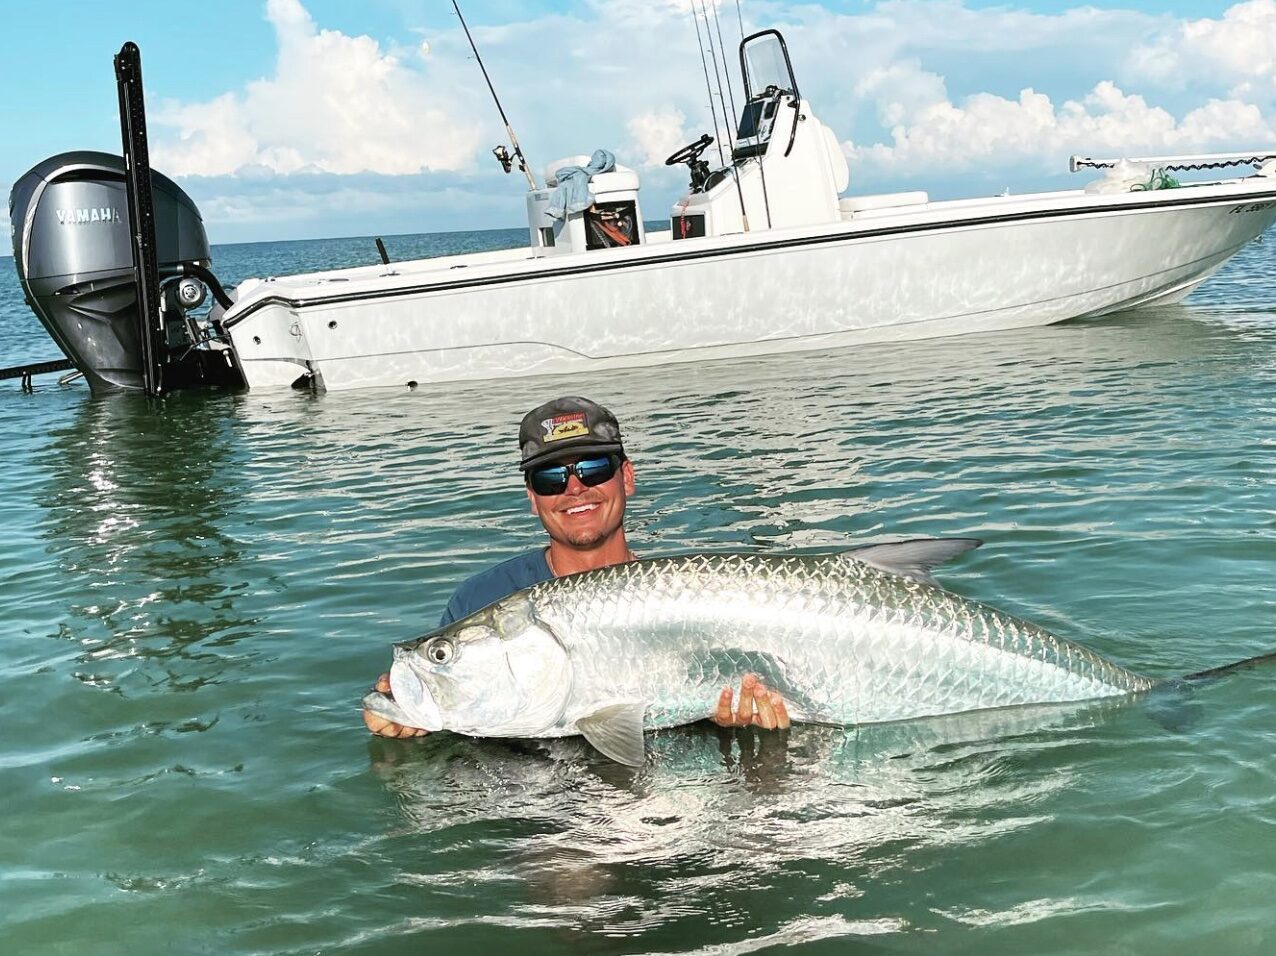 Client holds tarpon in the water during a tarpon fishing charter in Naples, enjoying a beautiful sunny day with the ocean as a backdrop.